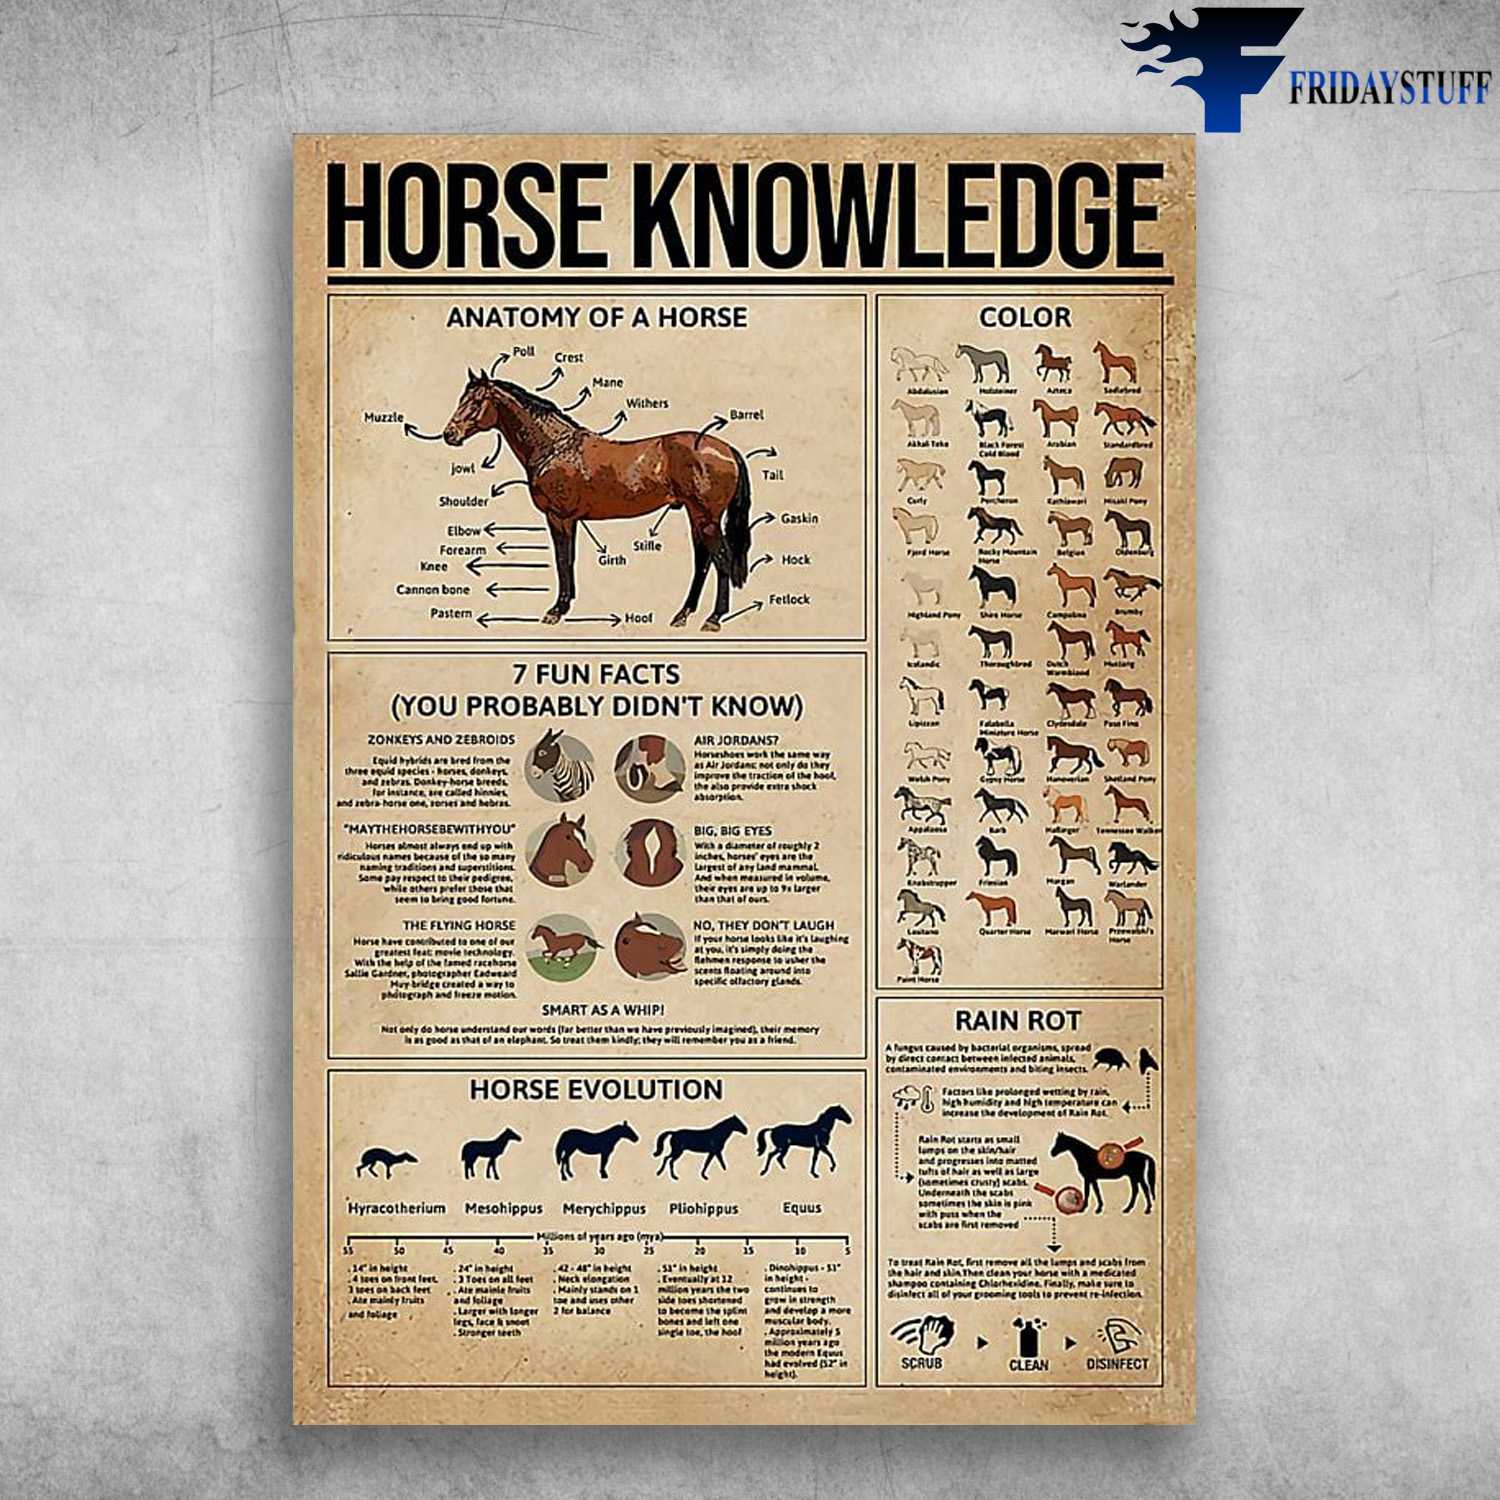 Horse Knowledge - Anatomy Of A Horse, Color, 7 Fun Facts, You Probaly Didn't Know, Horse Evolution, Rain Rot